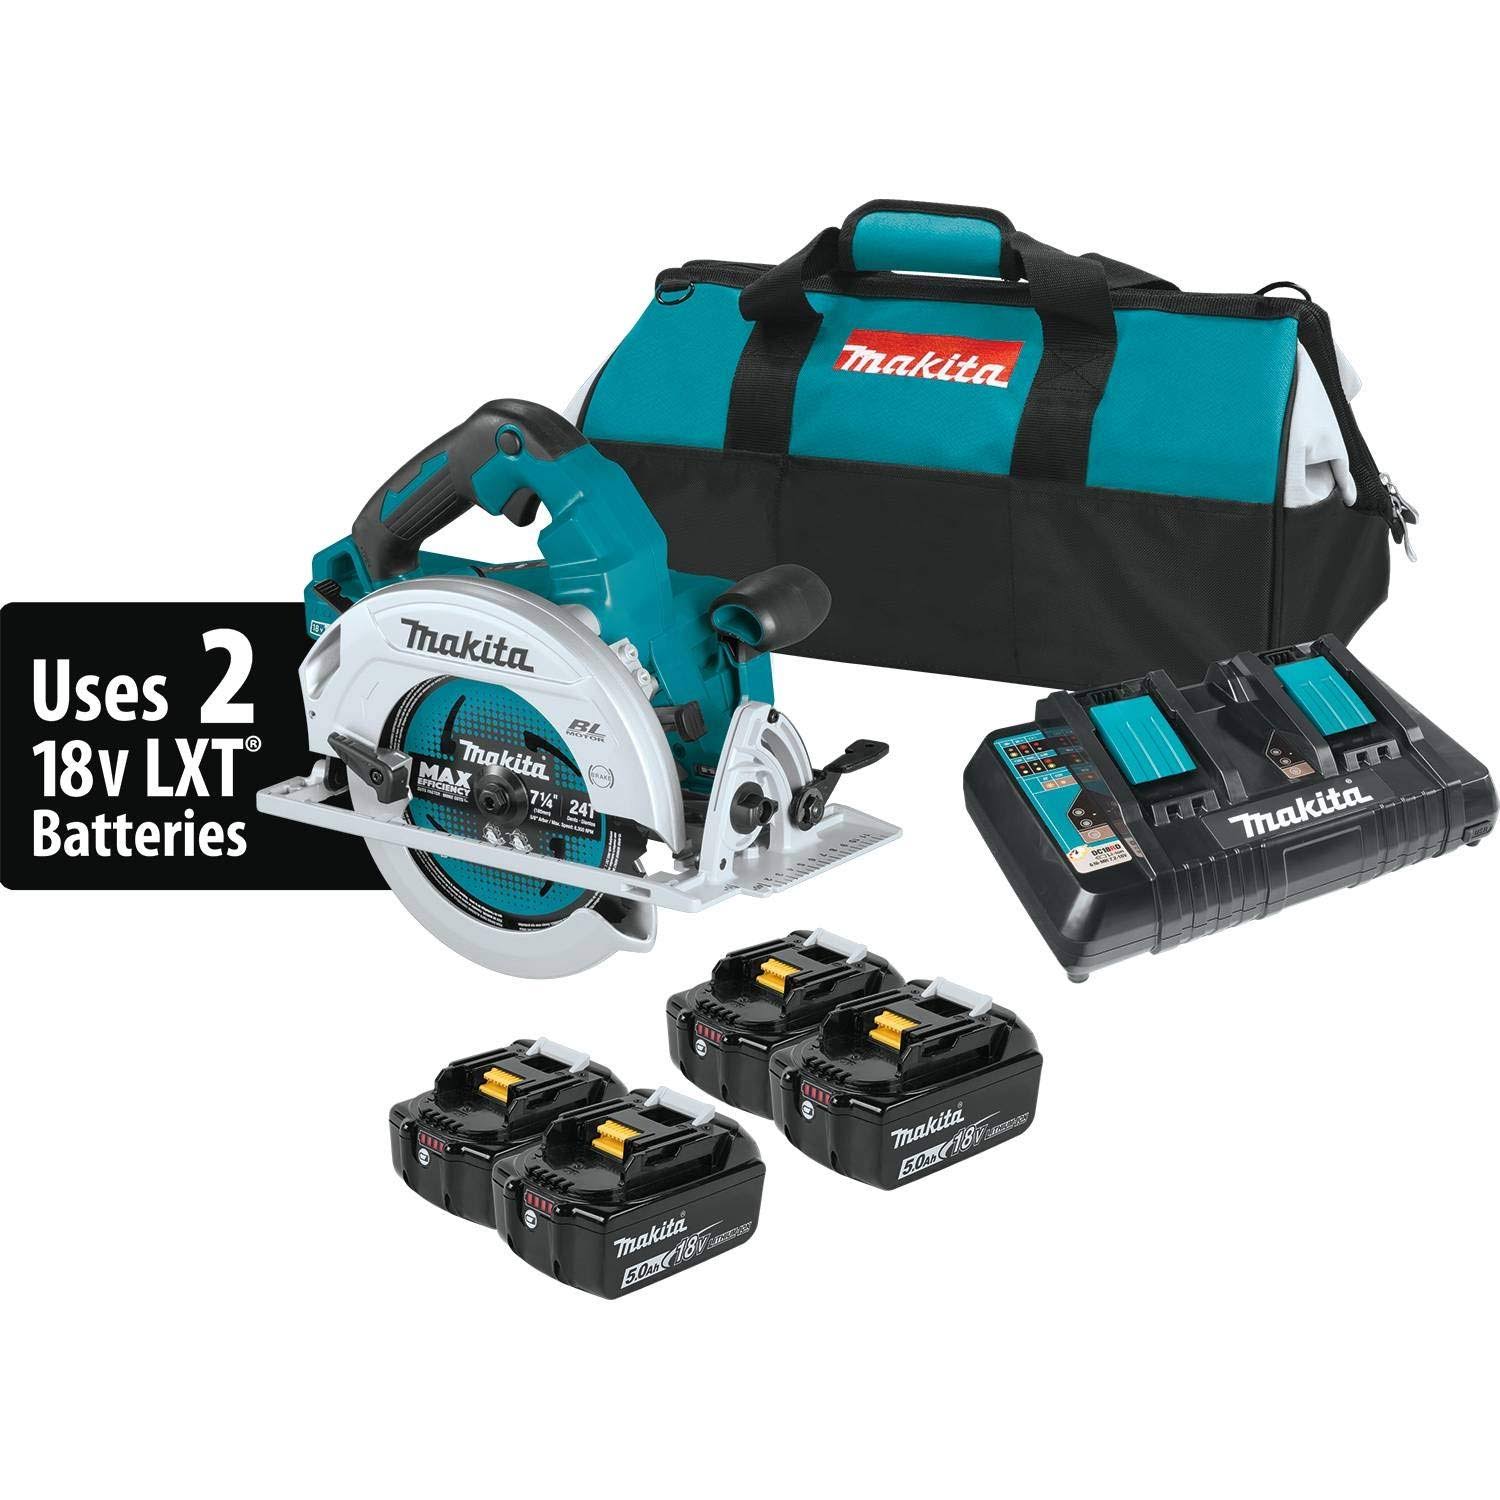 Makita 18V X2 LXT Lithium-Ion (36V) Brushless Cordless 7-1/4 in. Circular Saw Kit with 4 Batteries (5.0Ah) XSH06PT1